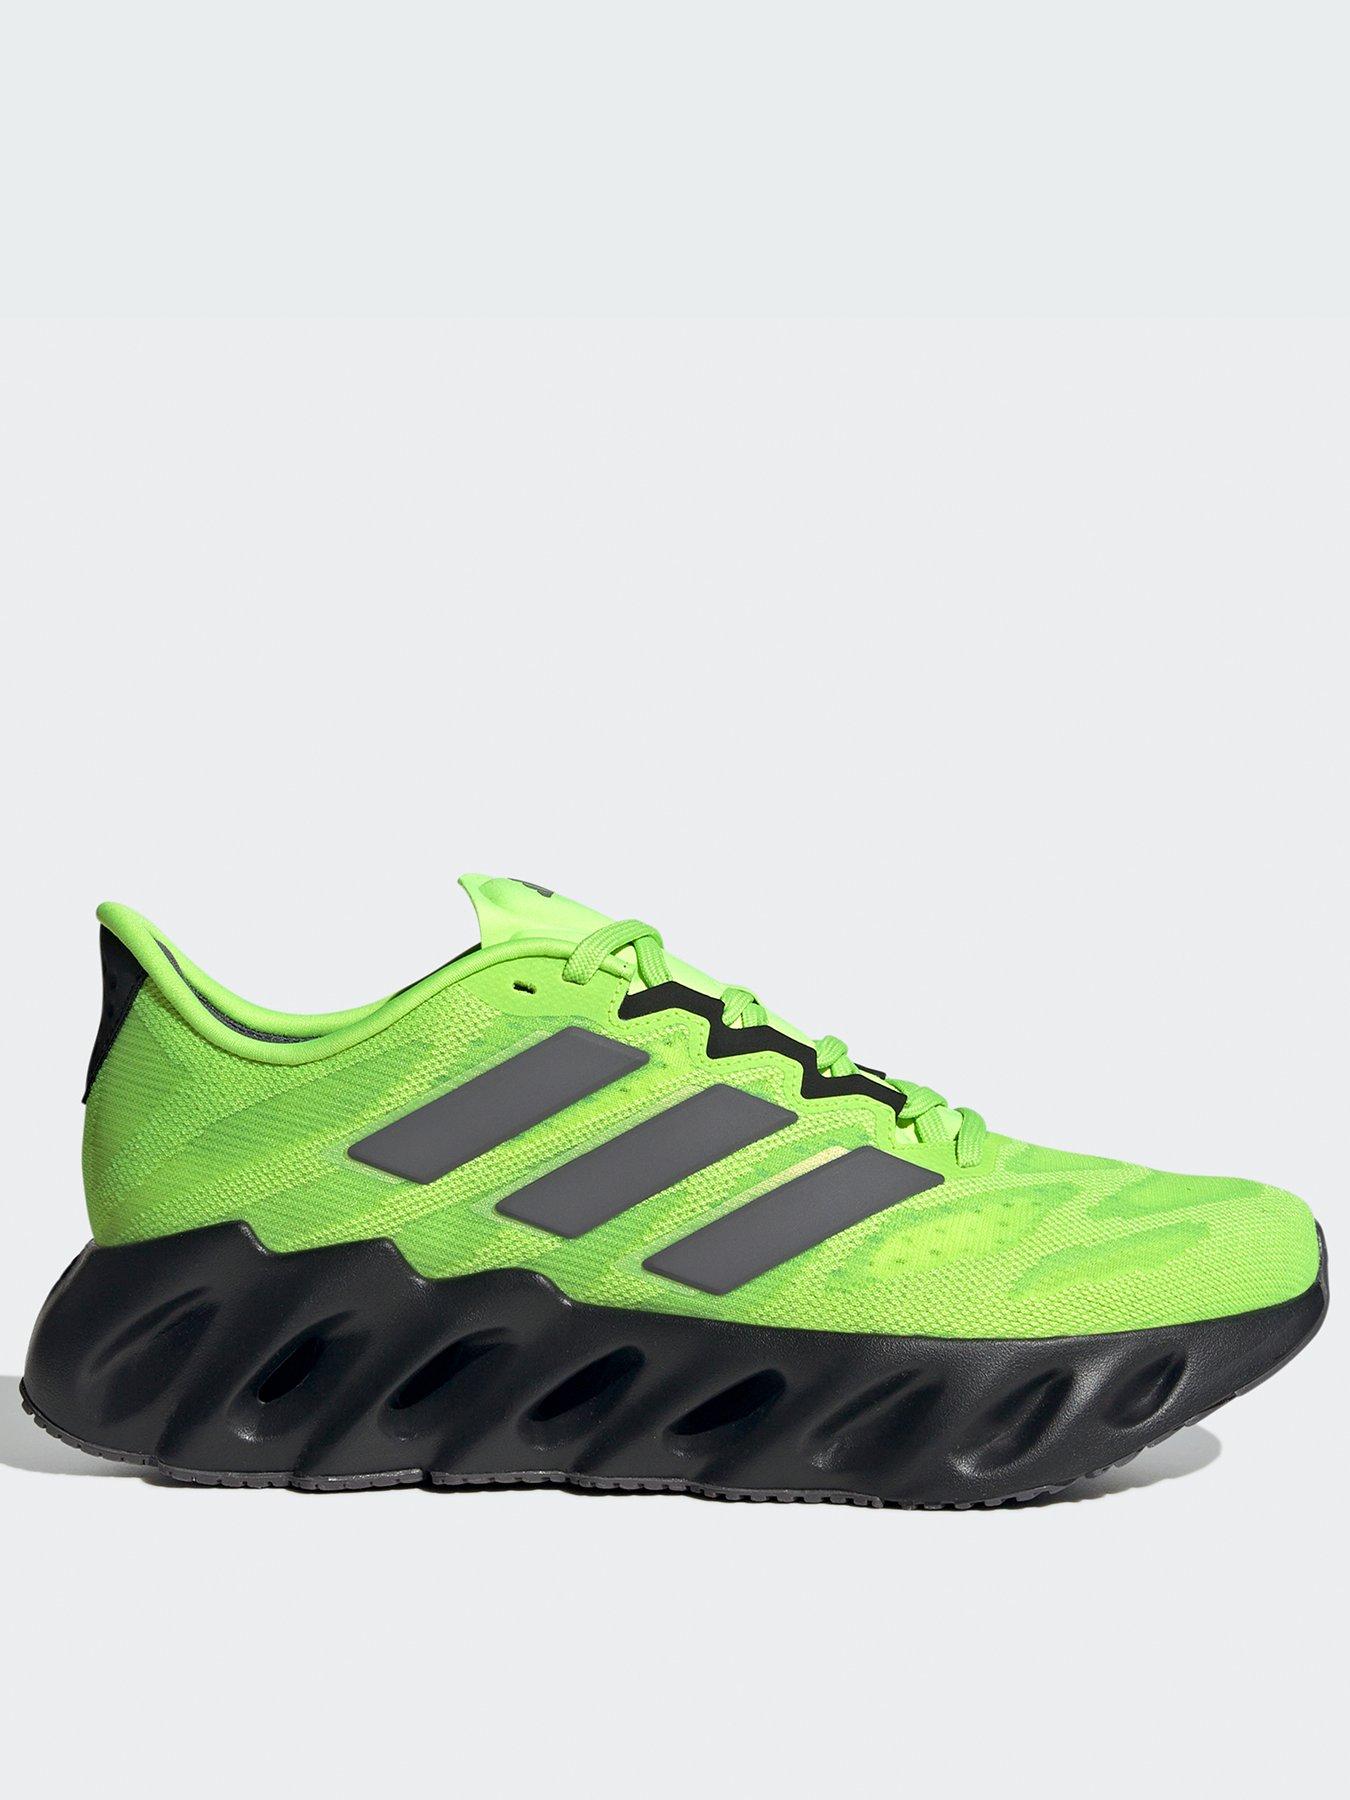 adidas switch fwd trainers yellow